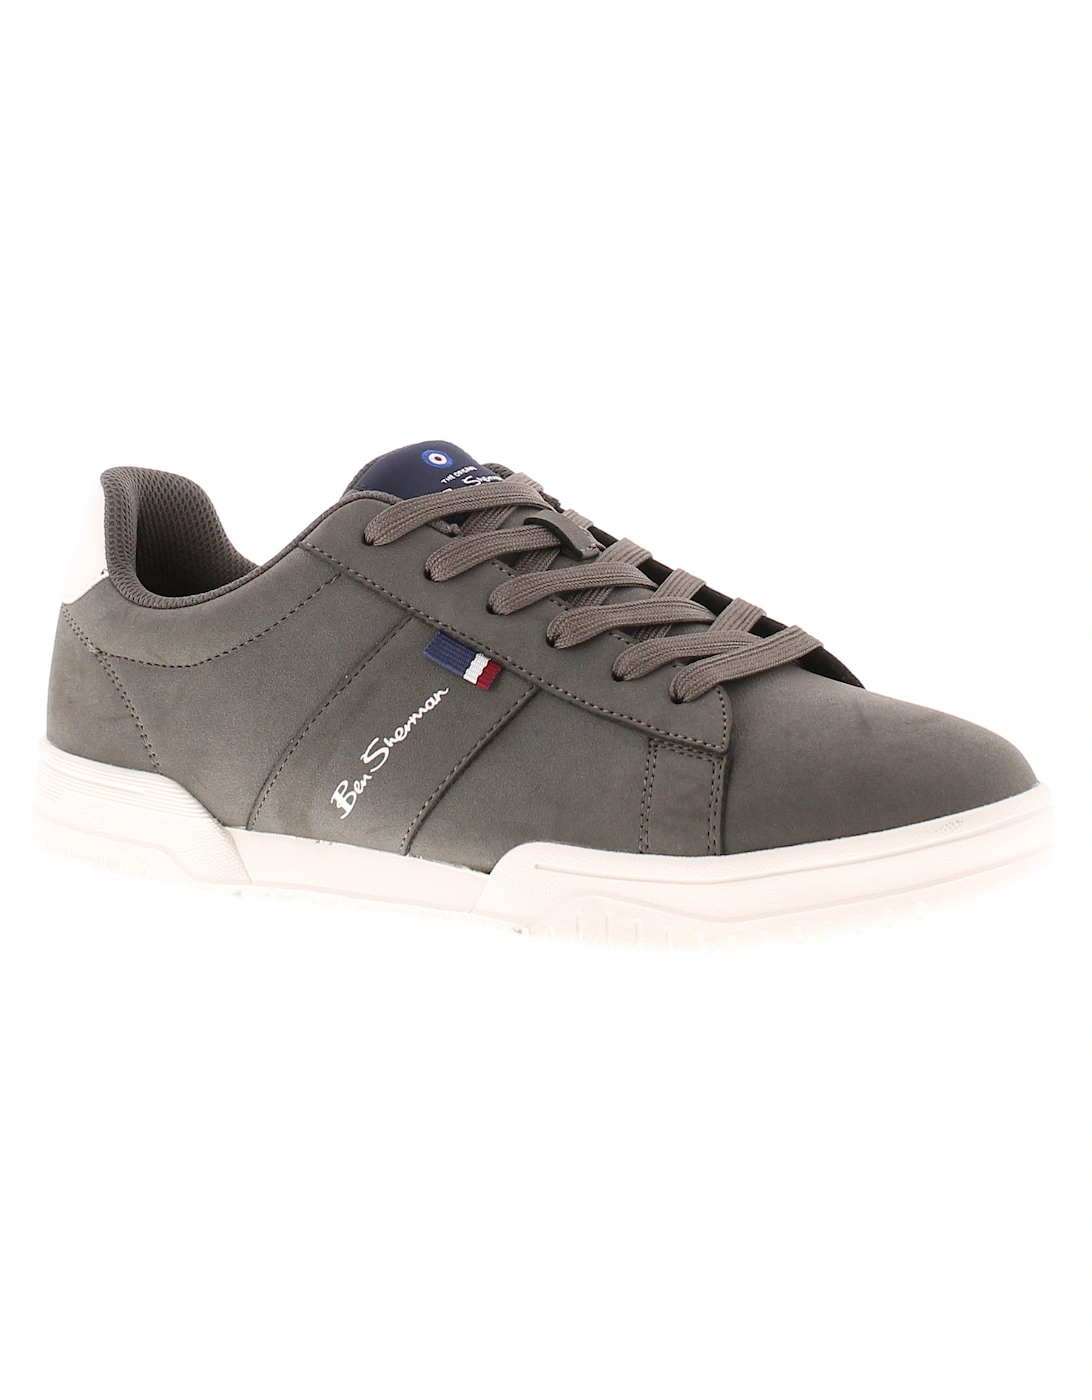 Mens Shoes Casual Delta grey UK Size, 6 of 5